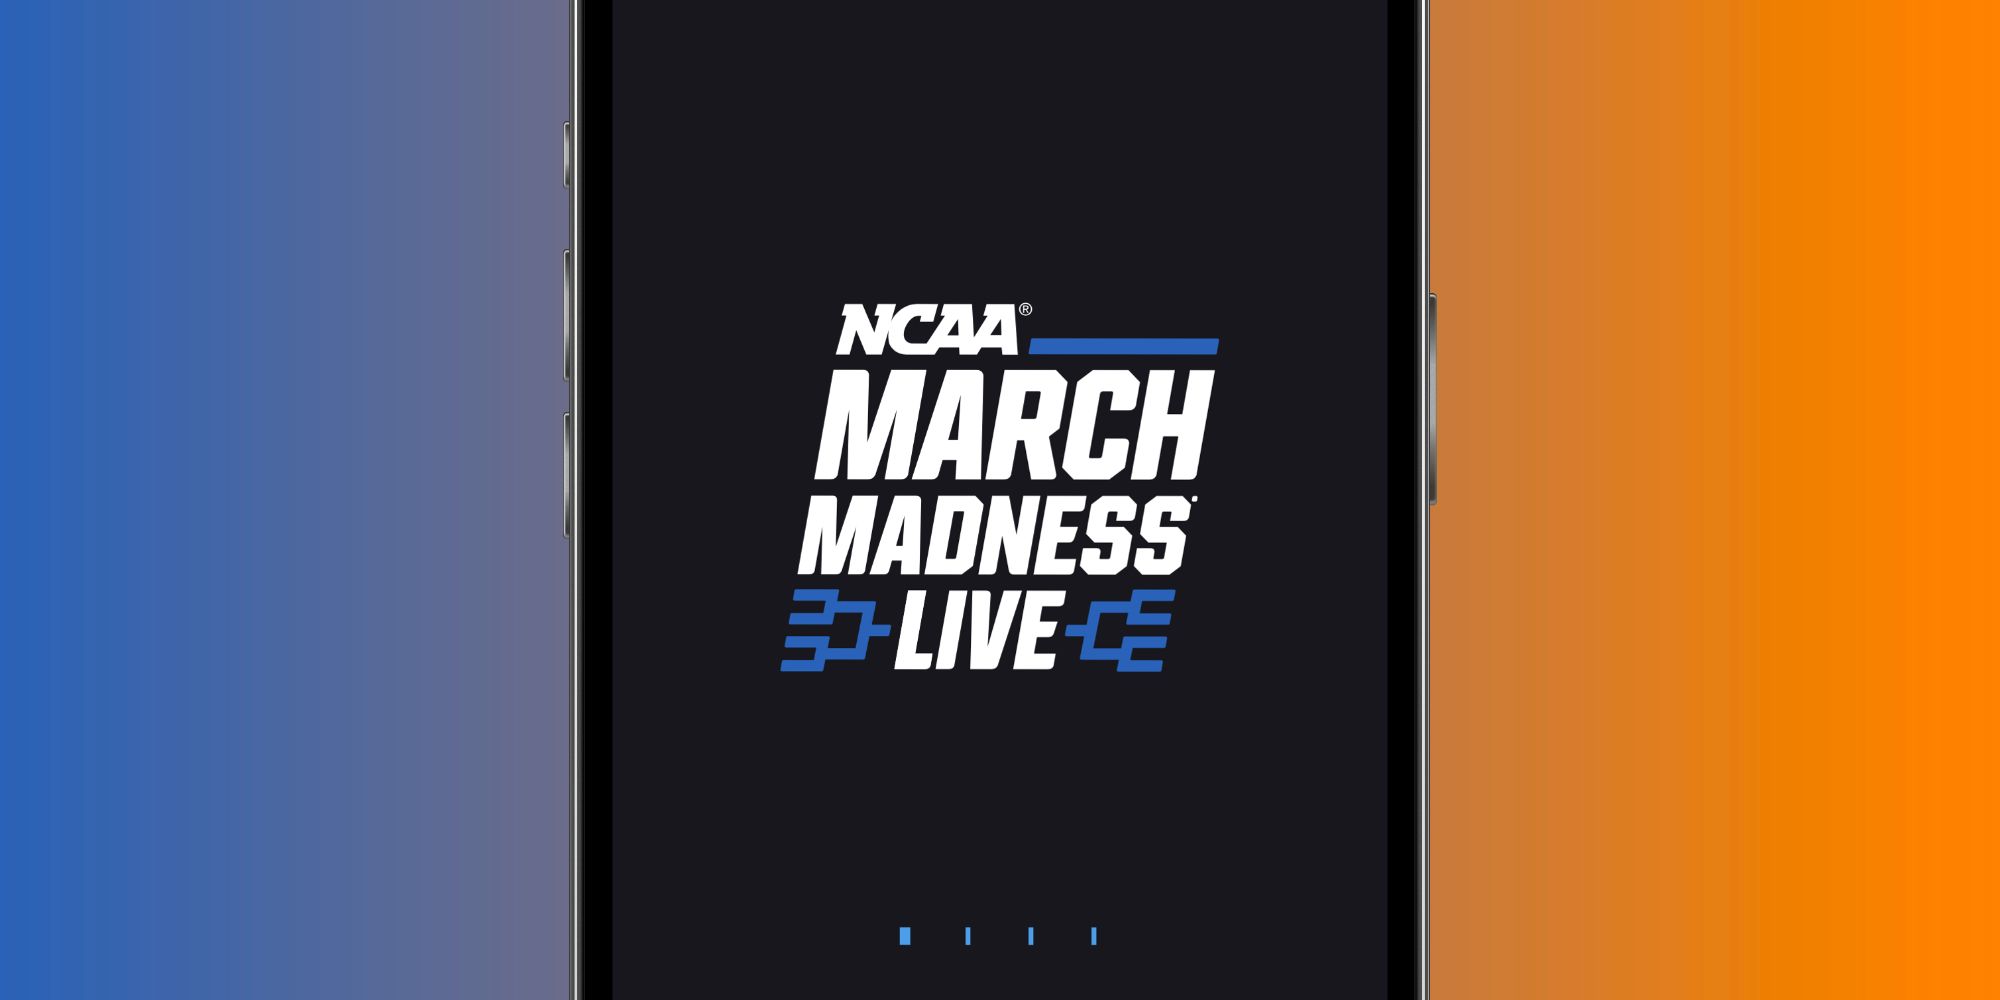 How To Watch March Madness 2022 Without Cable (Everything You Need To Know)